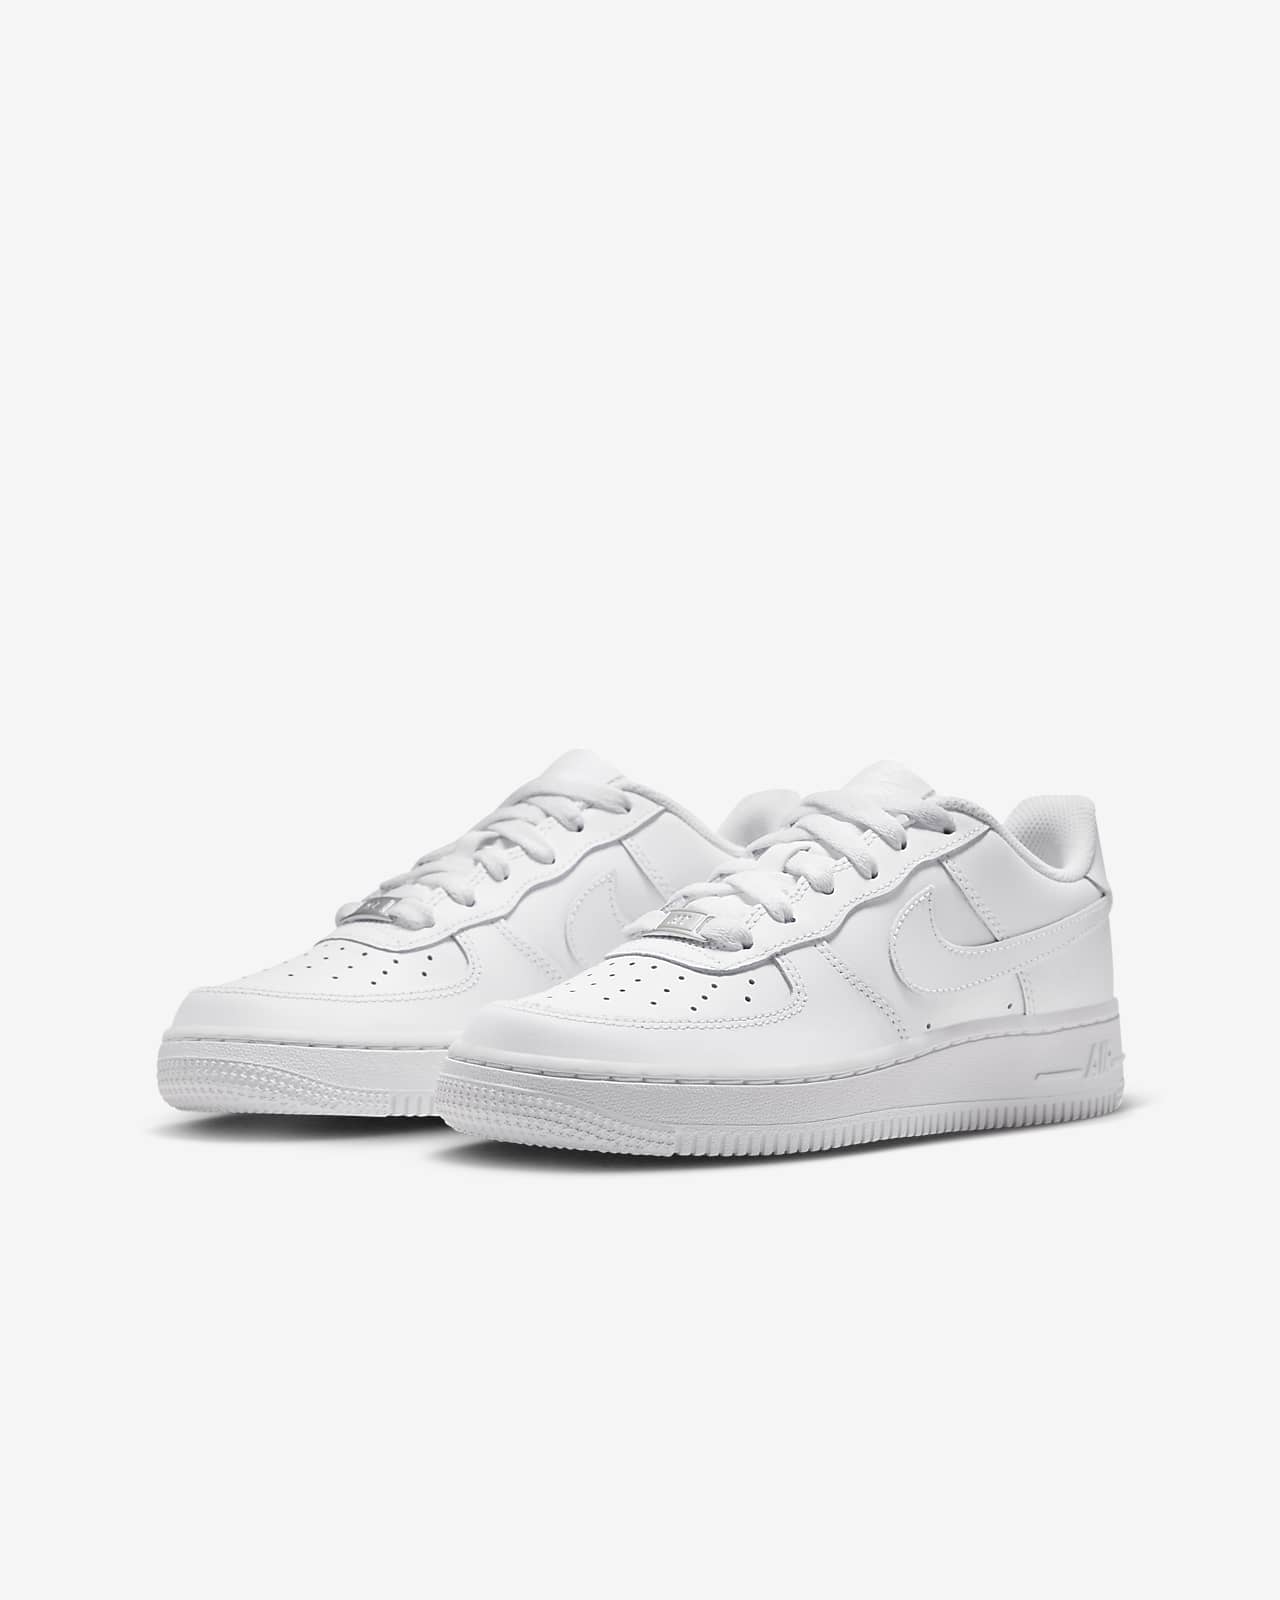 nike air force 1 low junior size 4